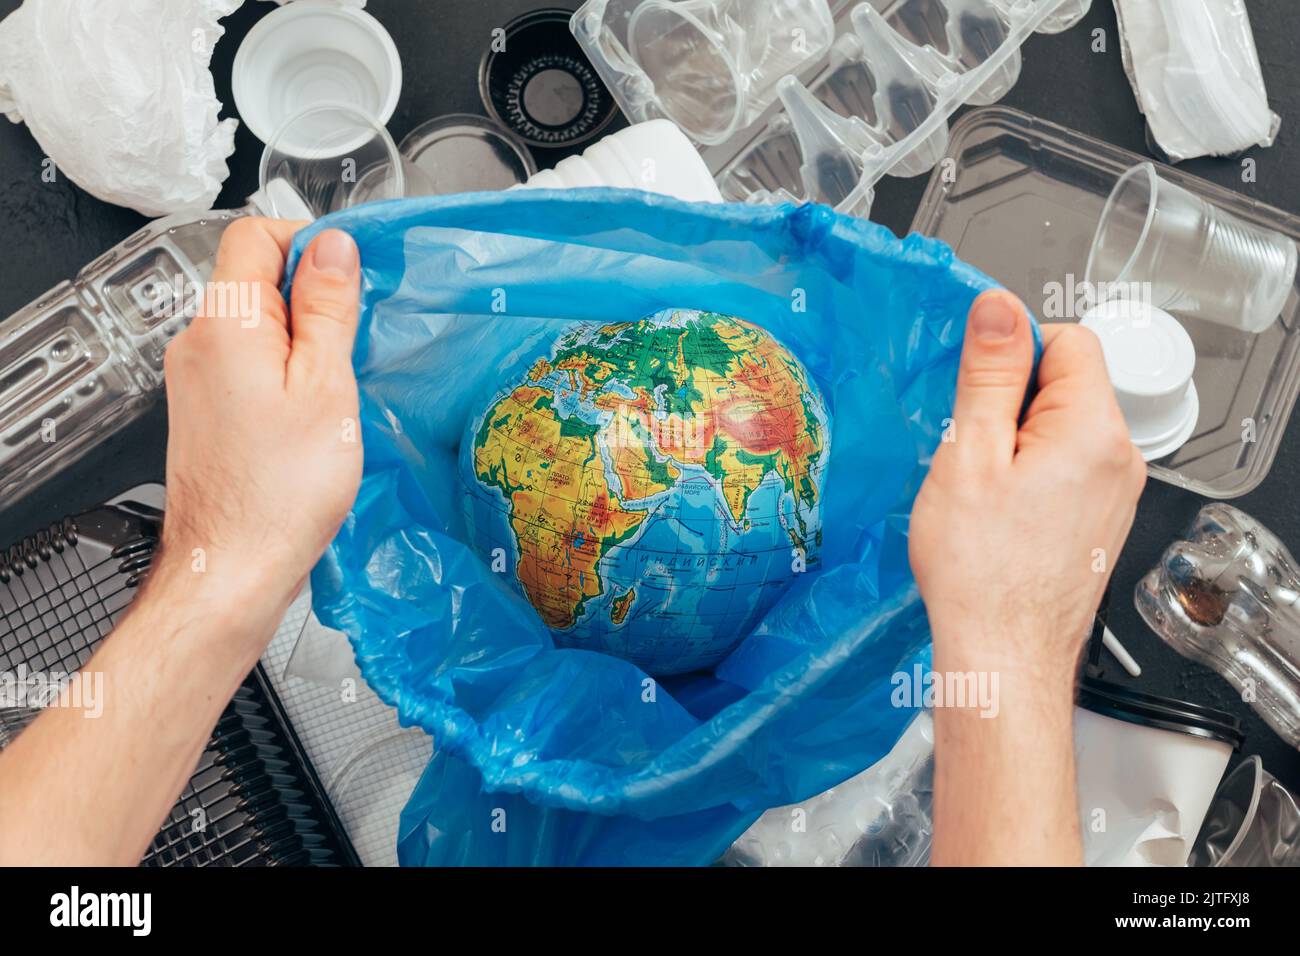 save planet ecology plastic waste recycling Stock Photo